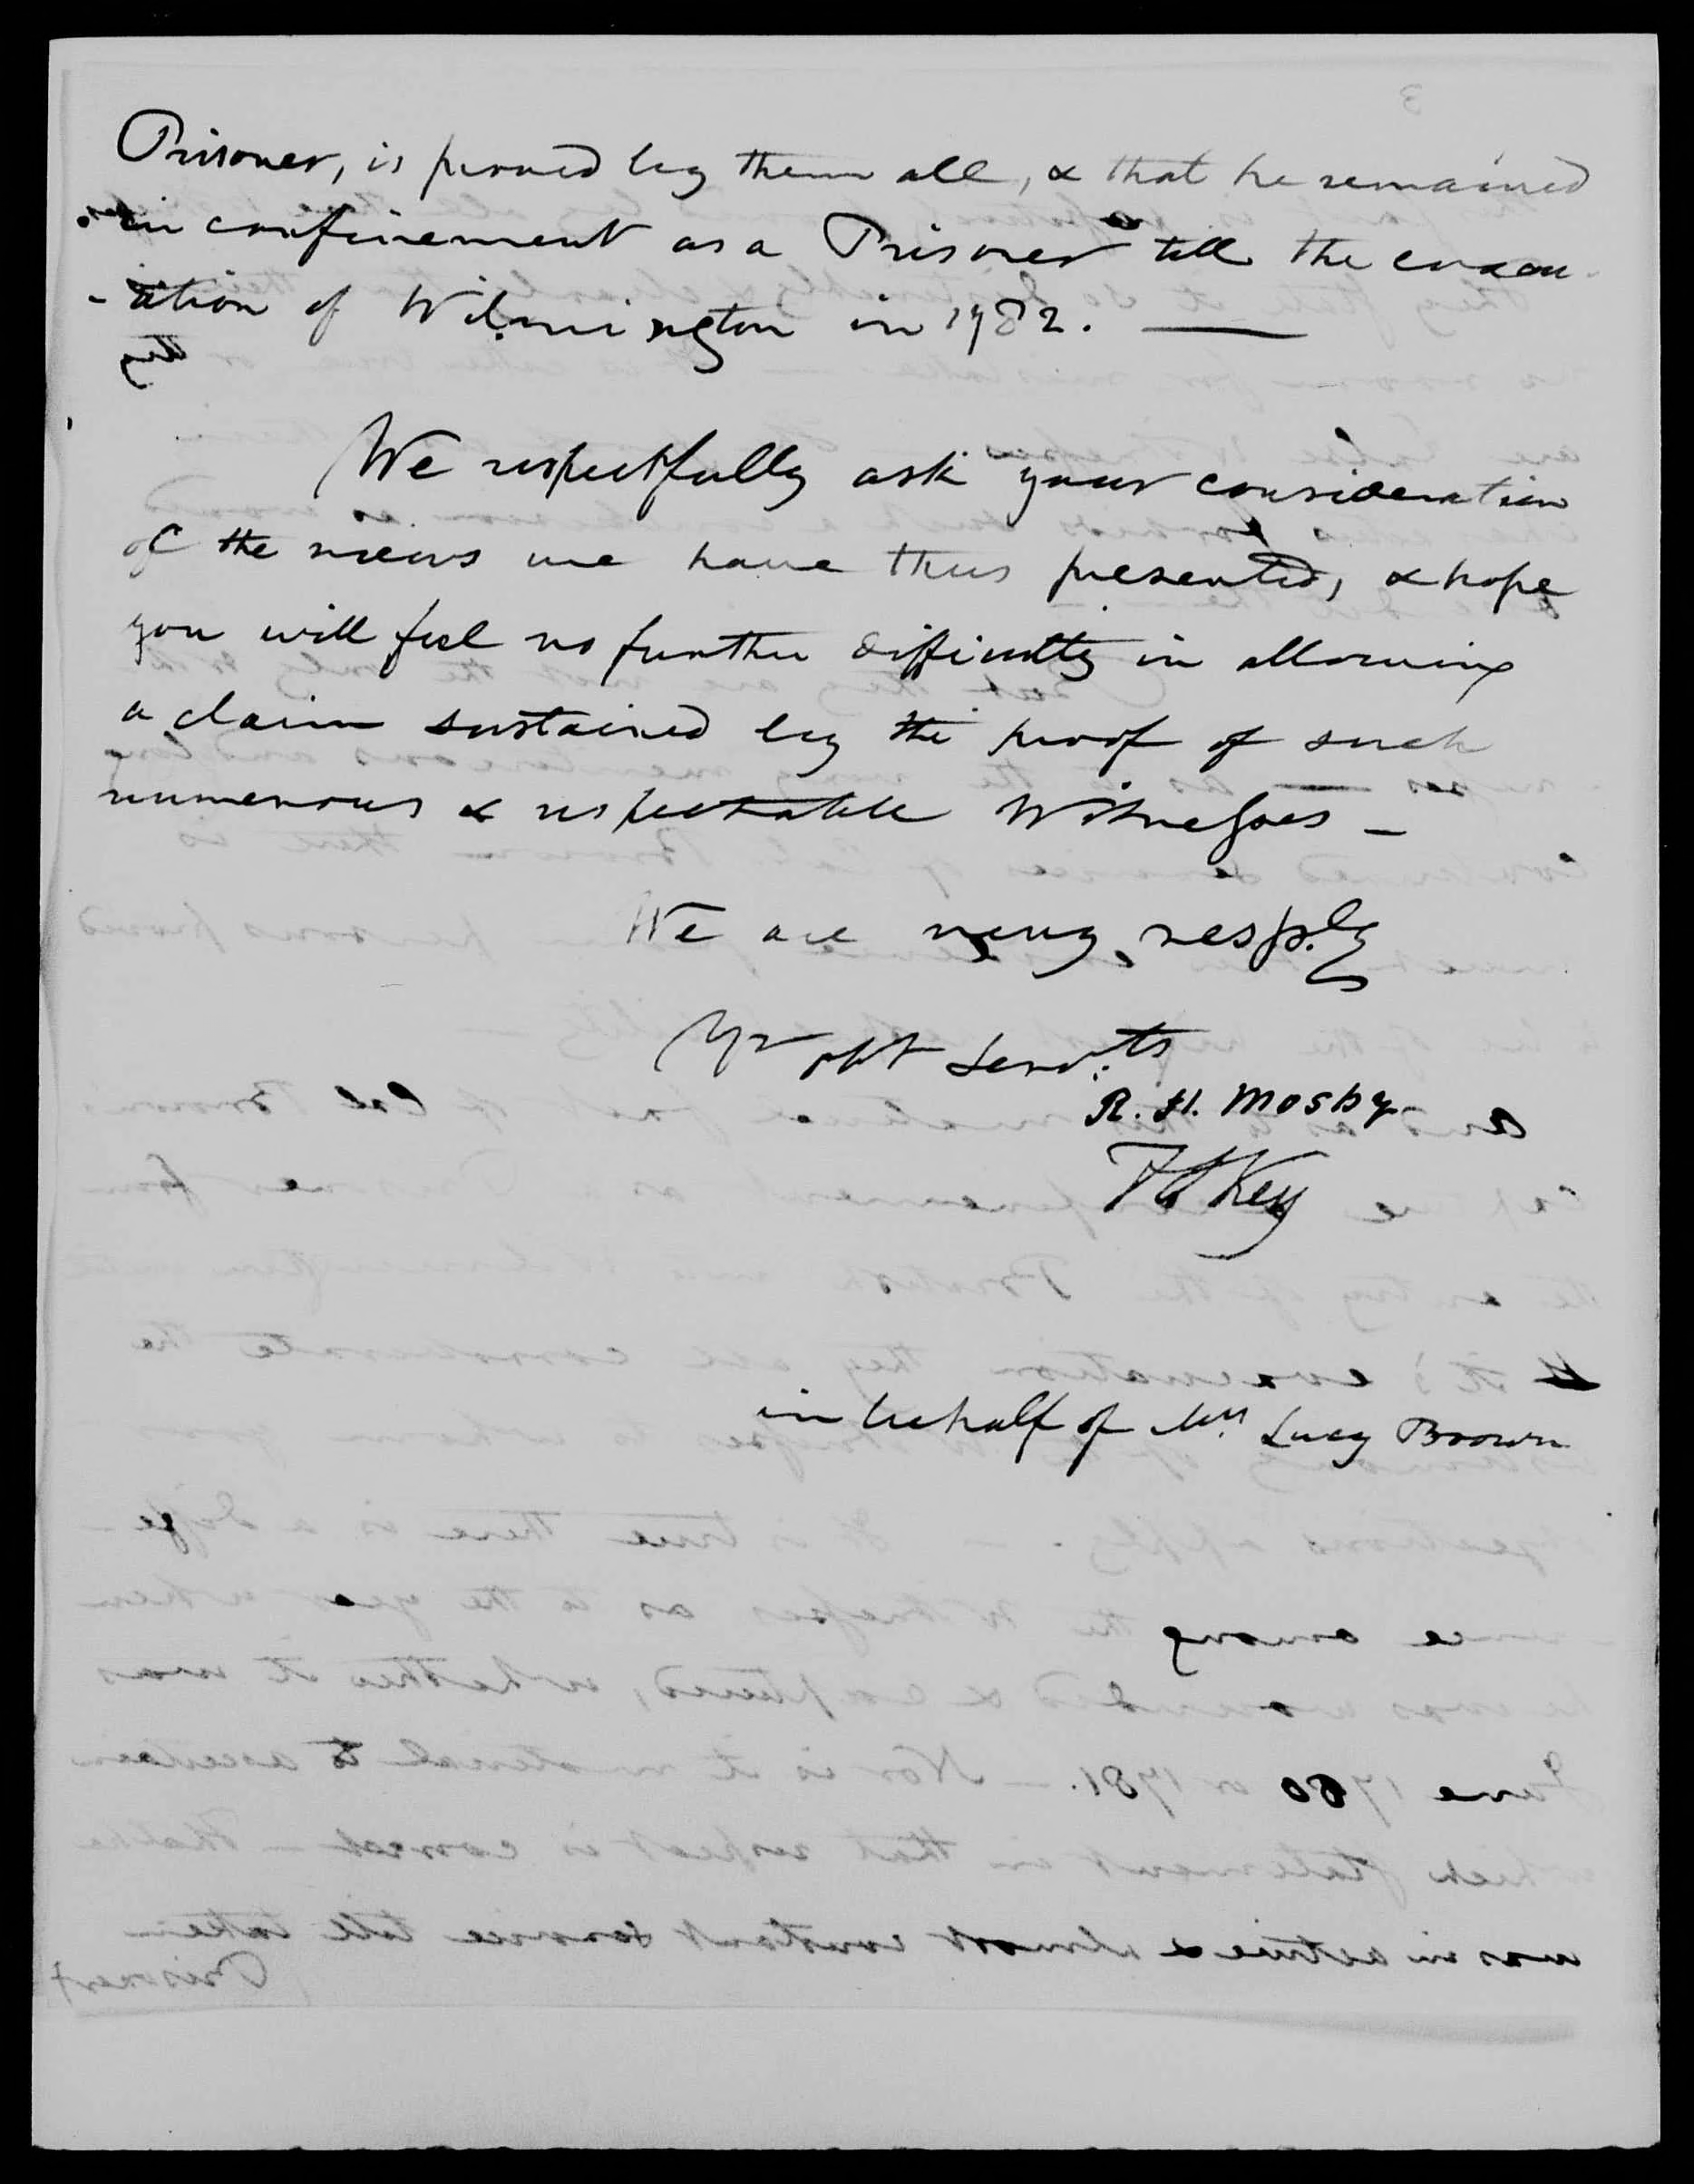 Letter from R. H. Mosby and Lucy Brown to the United States Pension Office, 19 June 1839, page 10